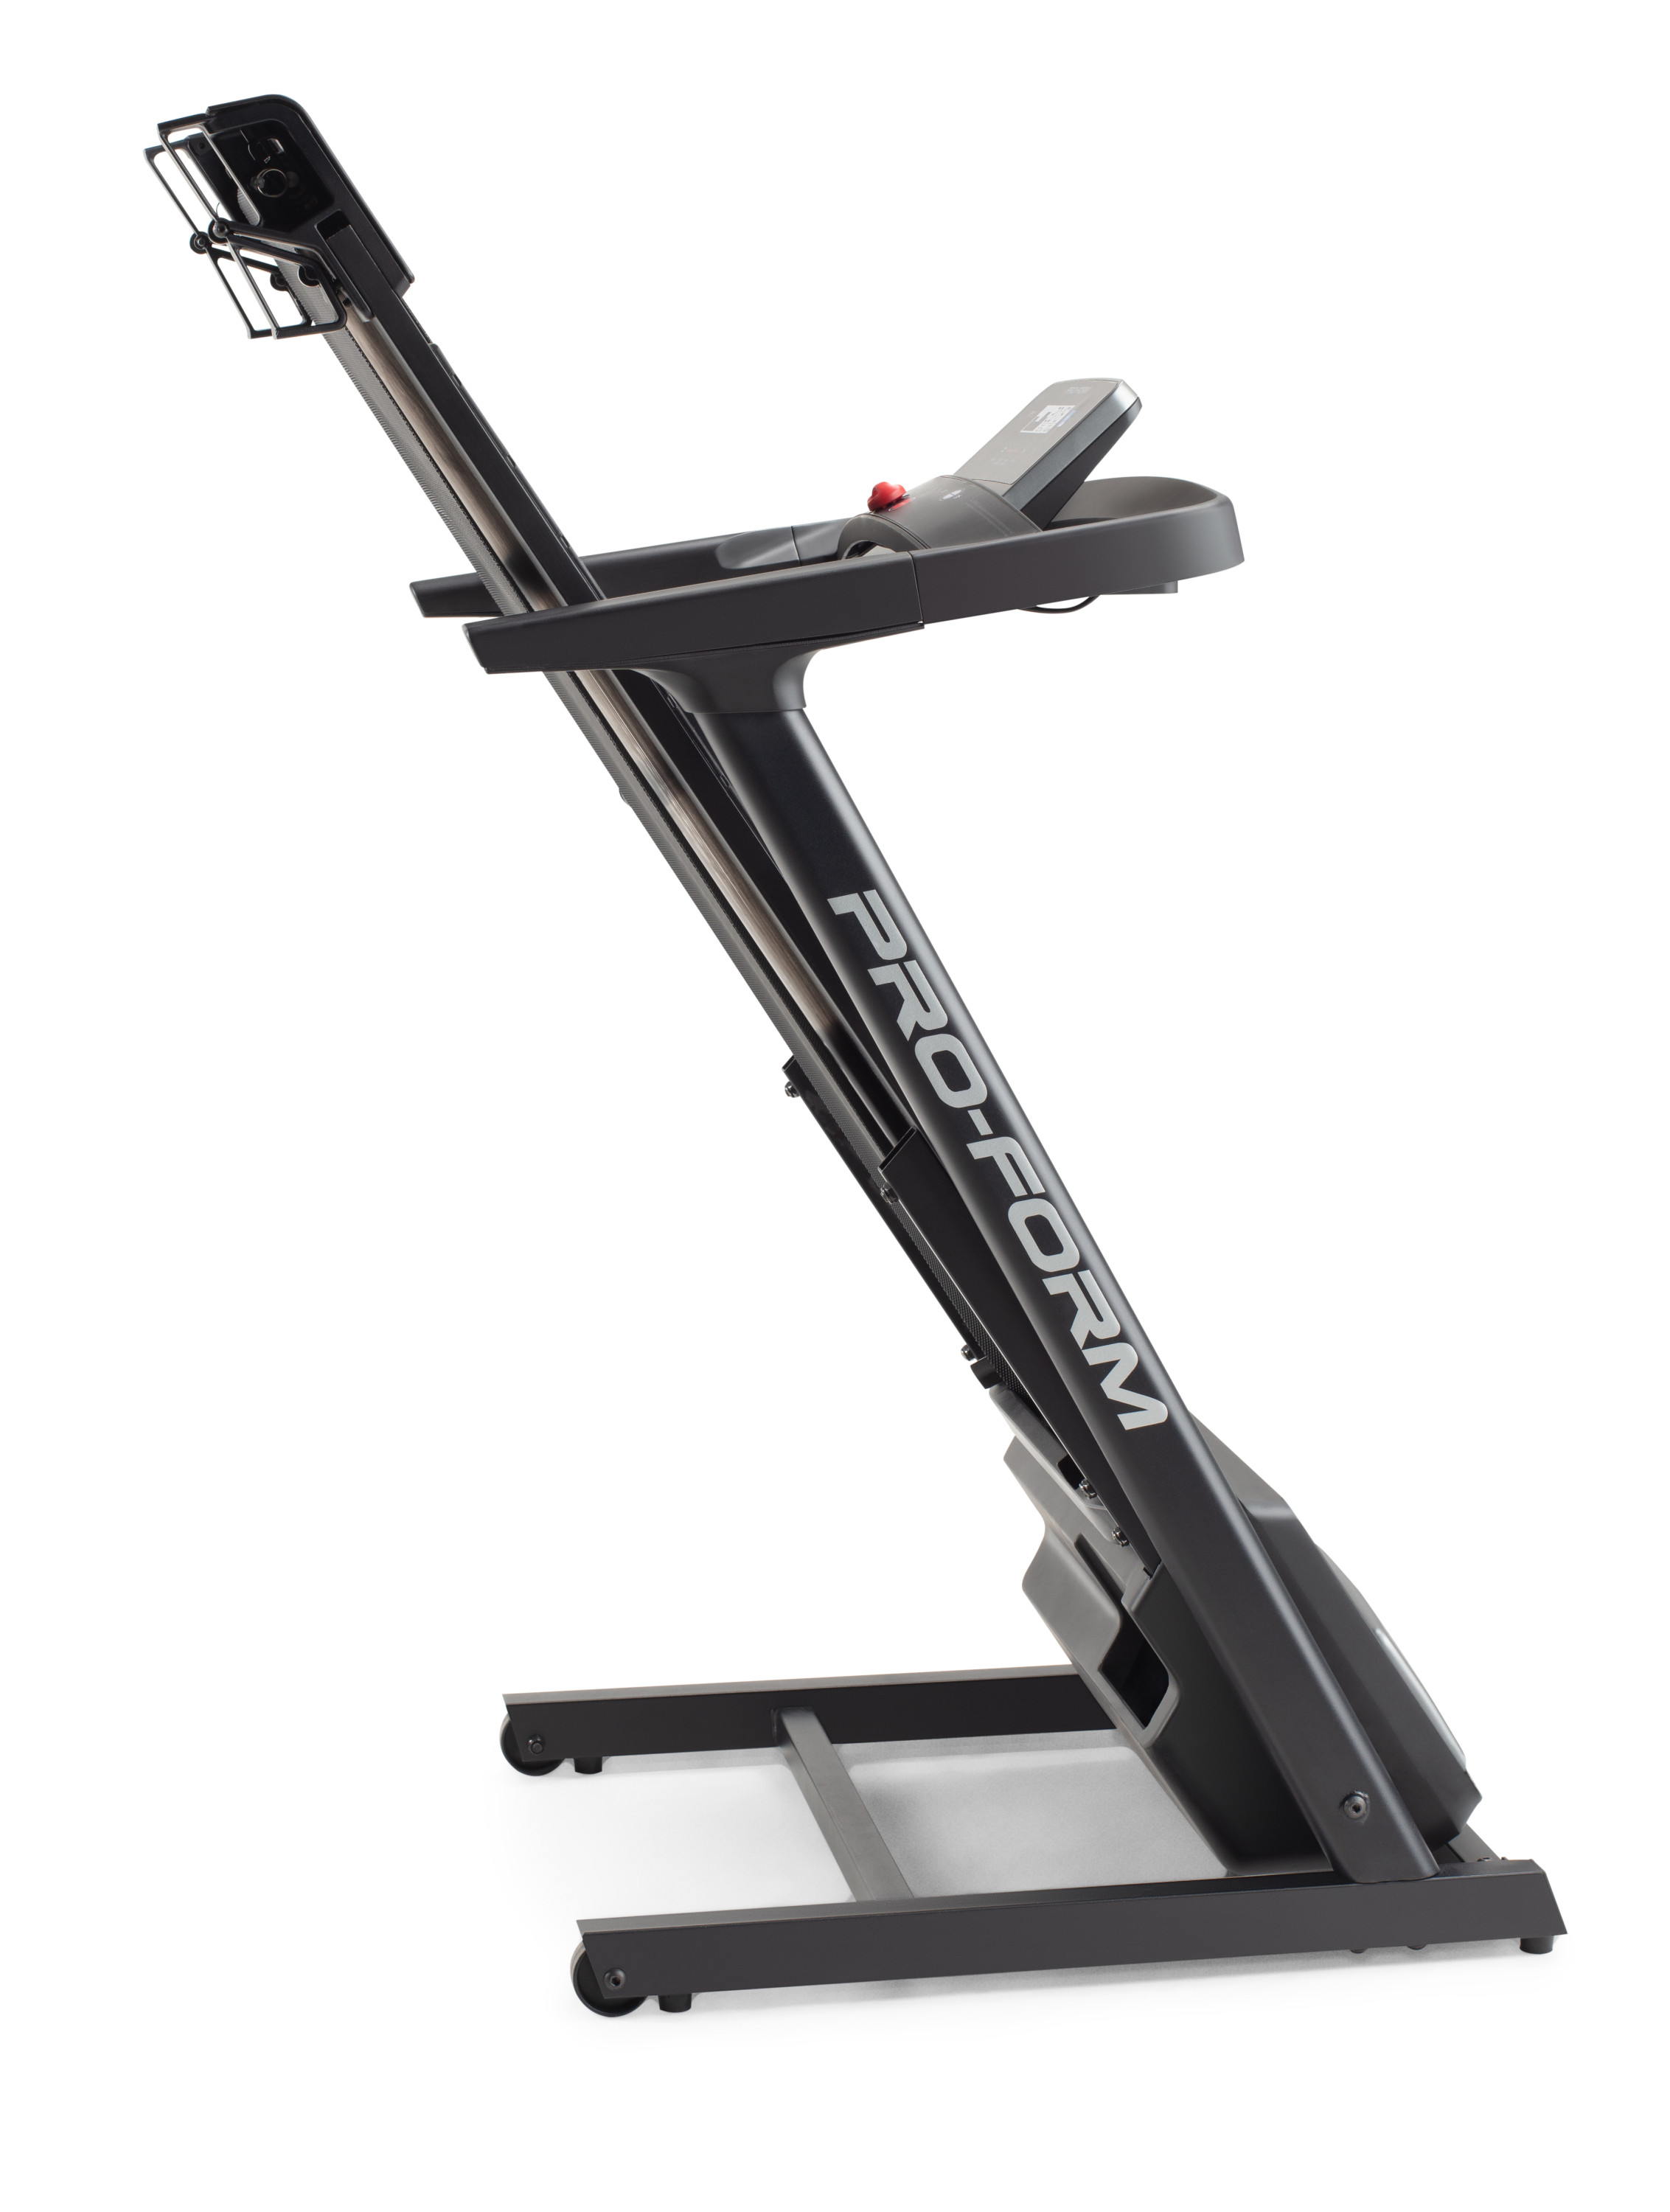 ProForm Cadence WLT Folding Treadmill with Reflex Deck for Walking and Jogging, iFit Bluetooth Enabled - image 15 of 31